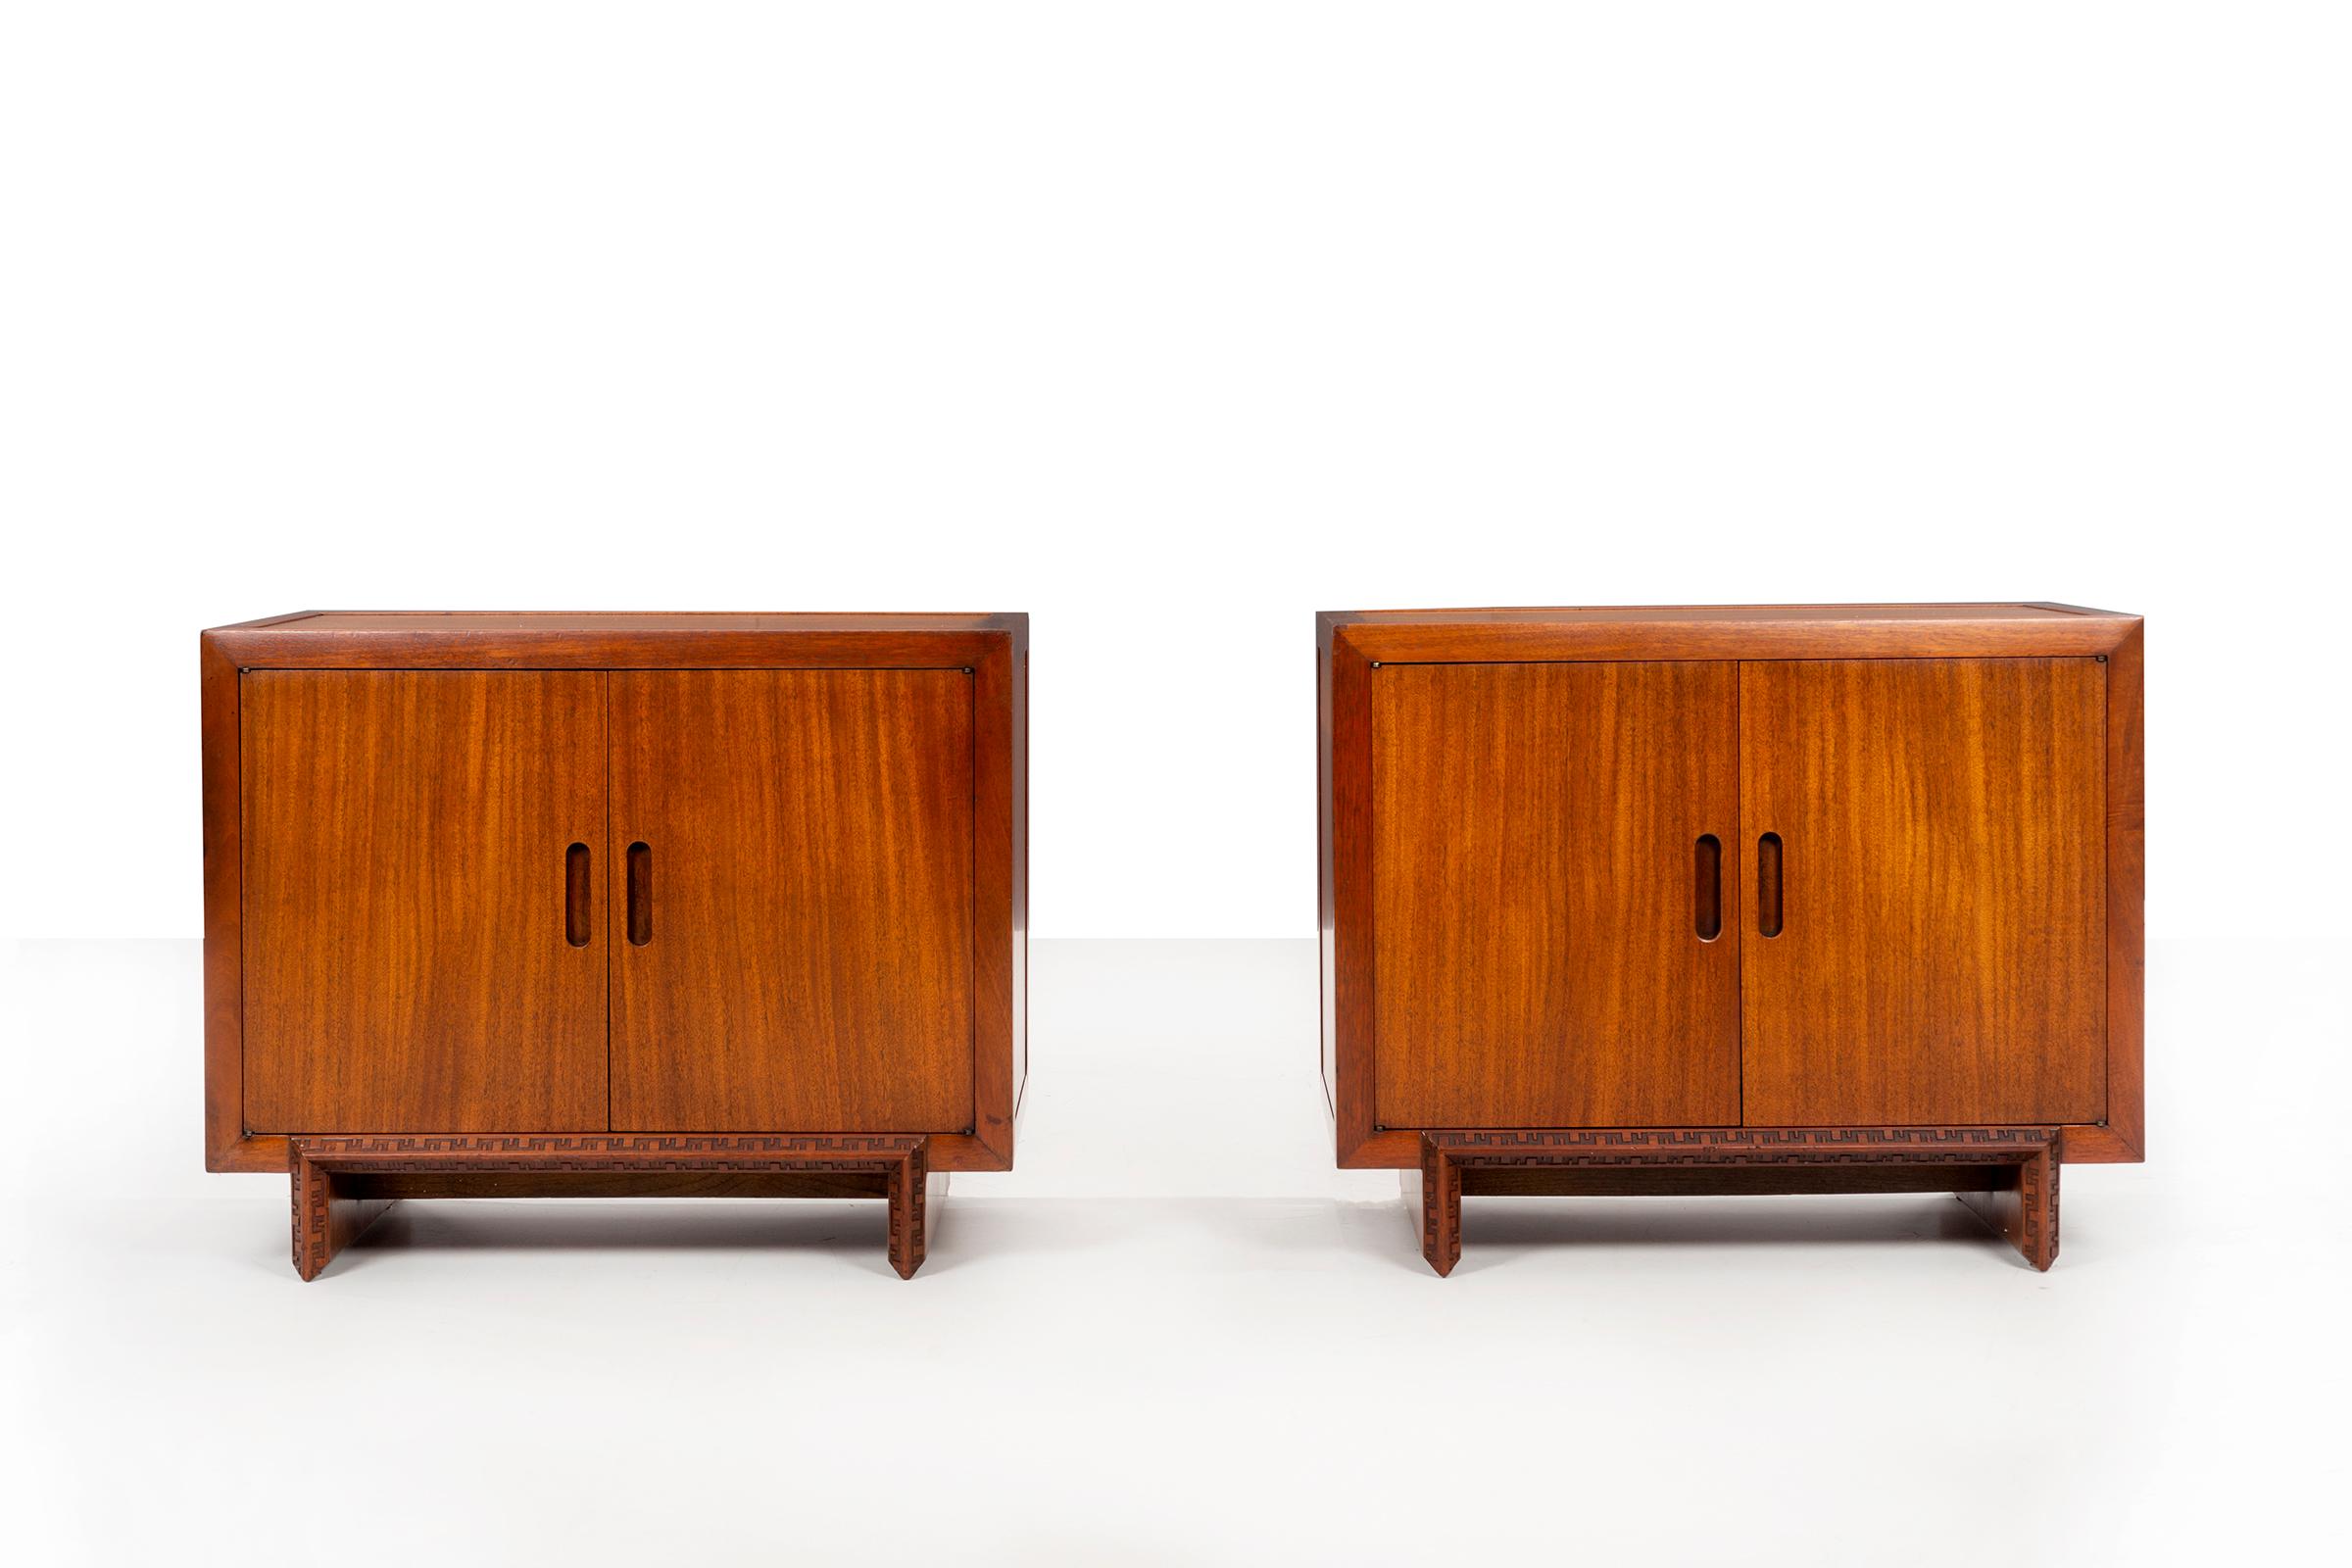 Frank Lloyd Wright pair of cabinets, mahogany veneer with solid mahogany carved design detailed edge, oil finish. (Stamped FLW).